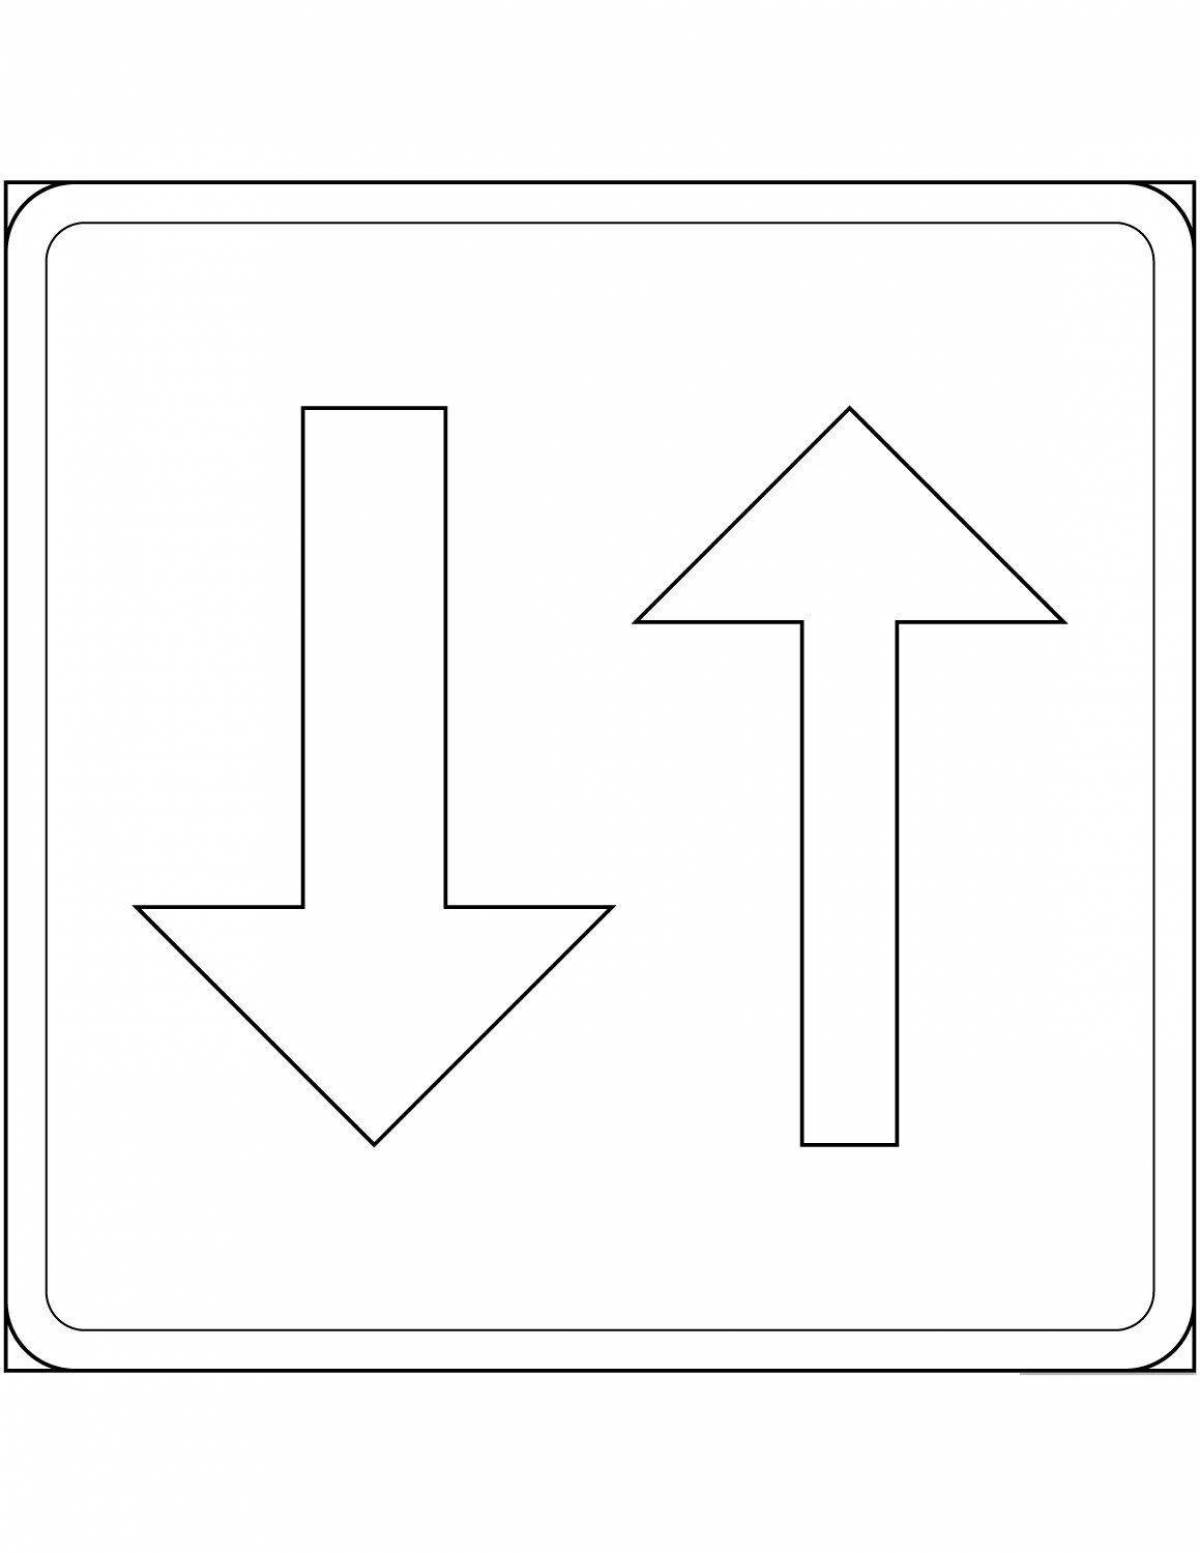 Coloring page bold main road sign